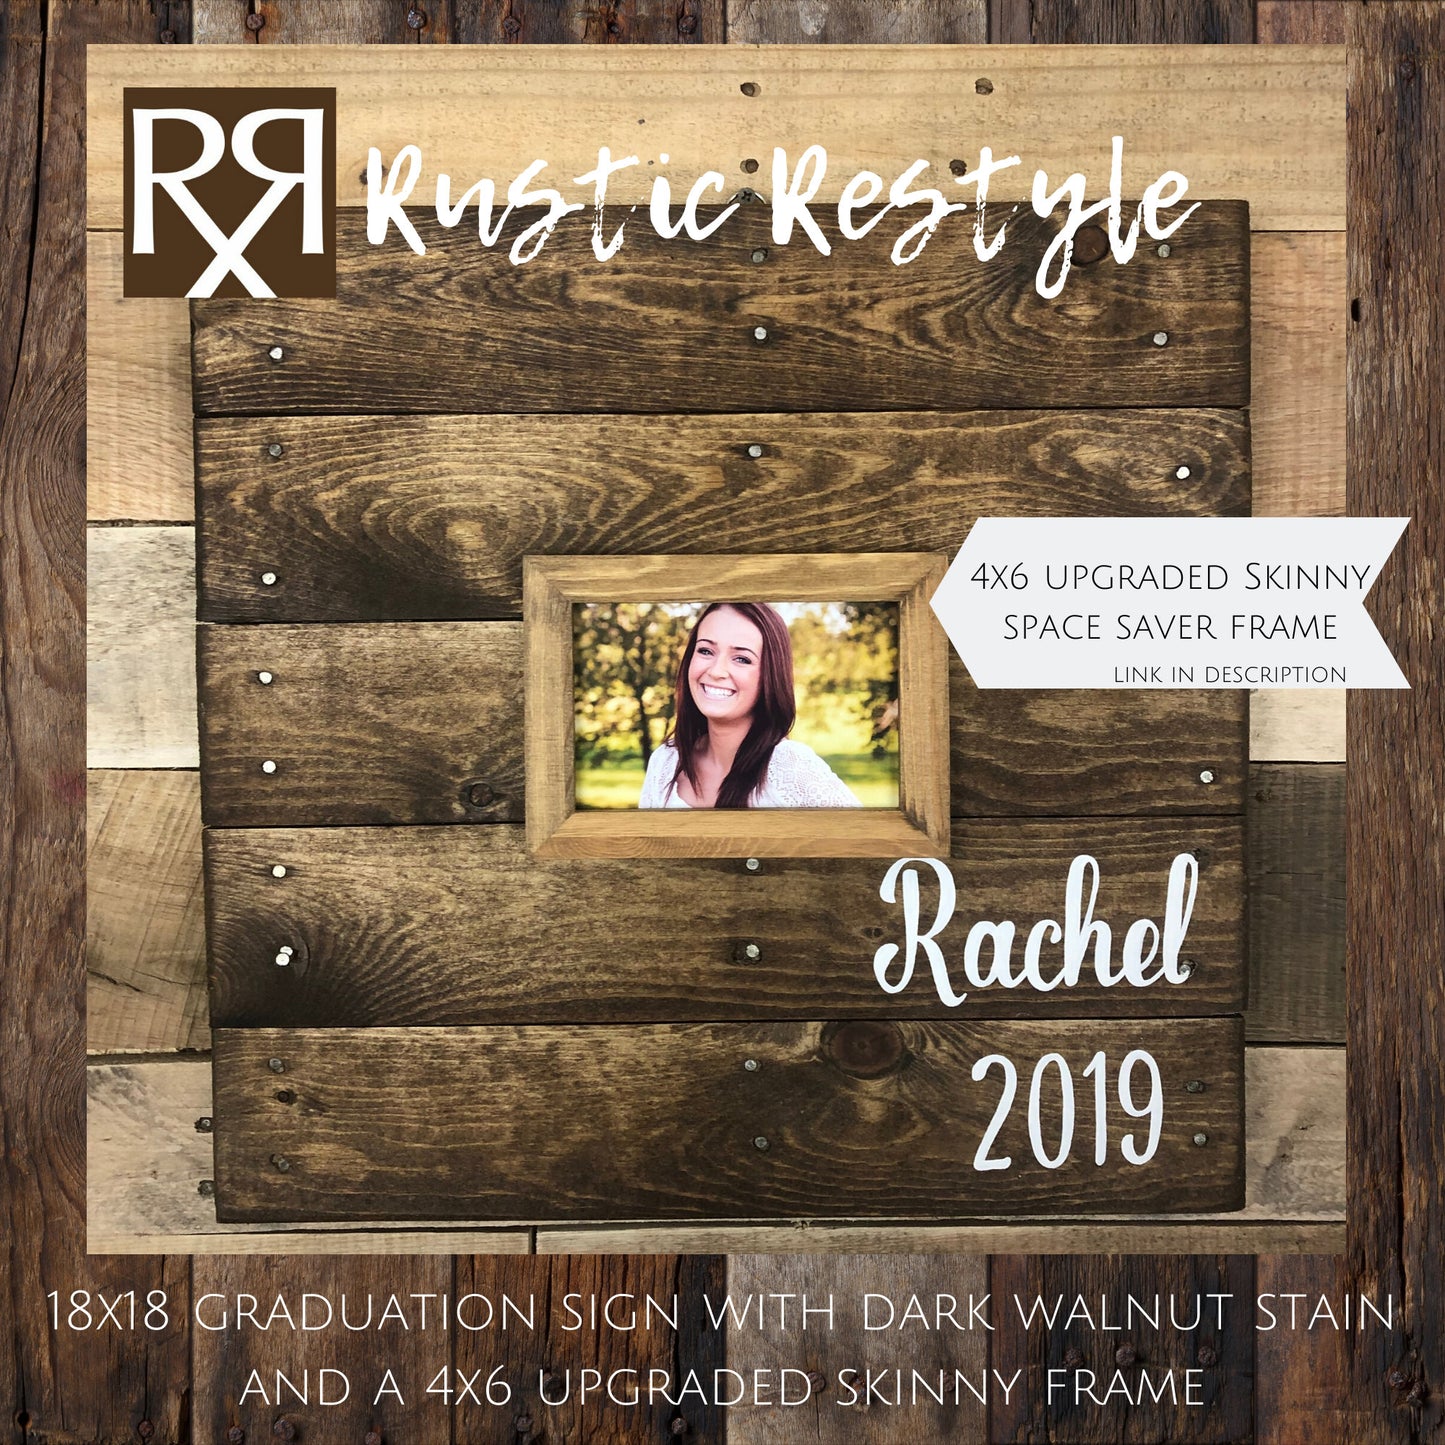 graduation guest book, party book, Creative Guest book alternative, class of 2020, guestbook frame, rustic sign, wood pallet sign, 18x18 - Rustic Restyle